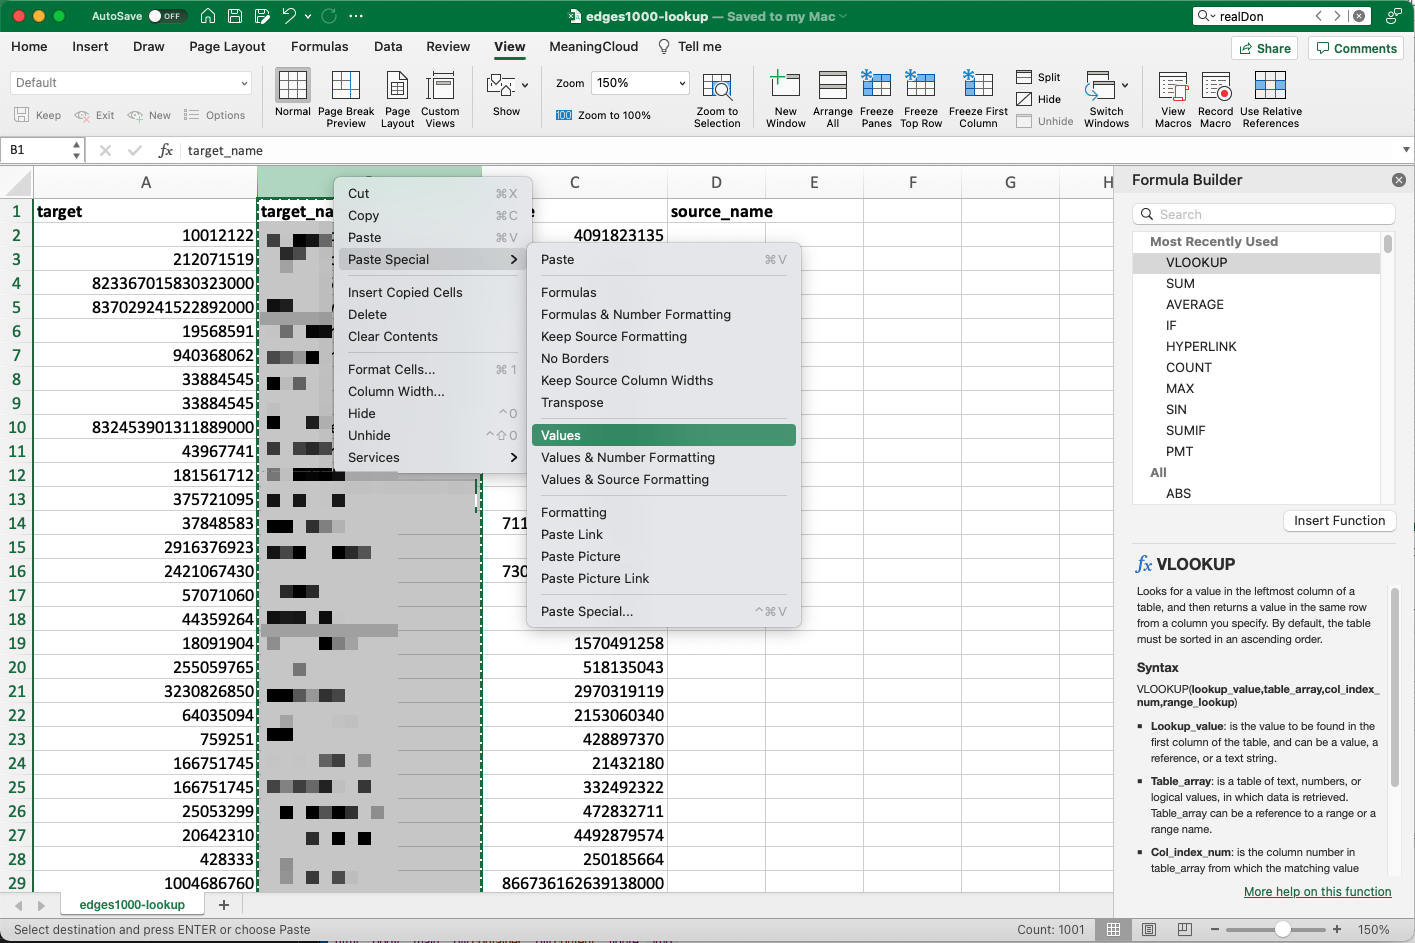 Copy->Paste Special will allow us to tell the software to insert the actual return values, rather than the formula, into the spreadsheet.